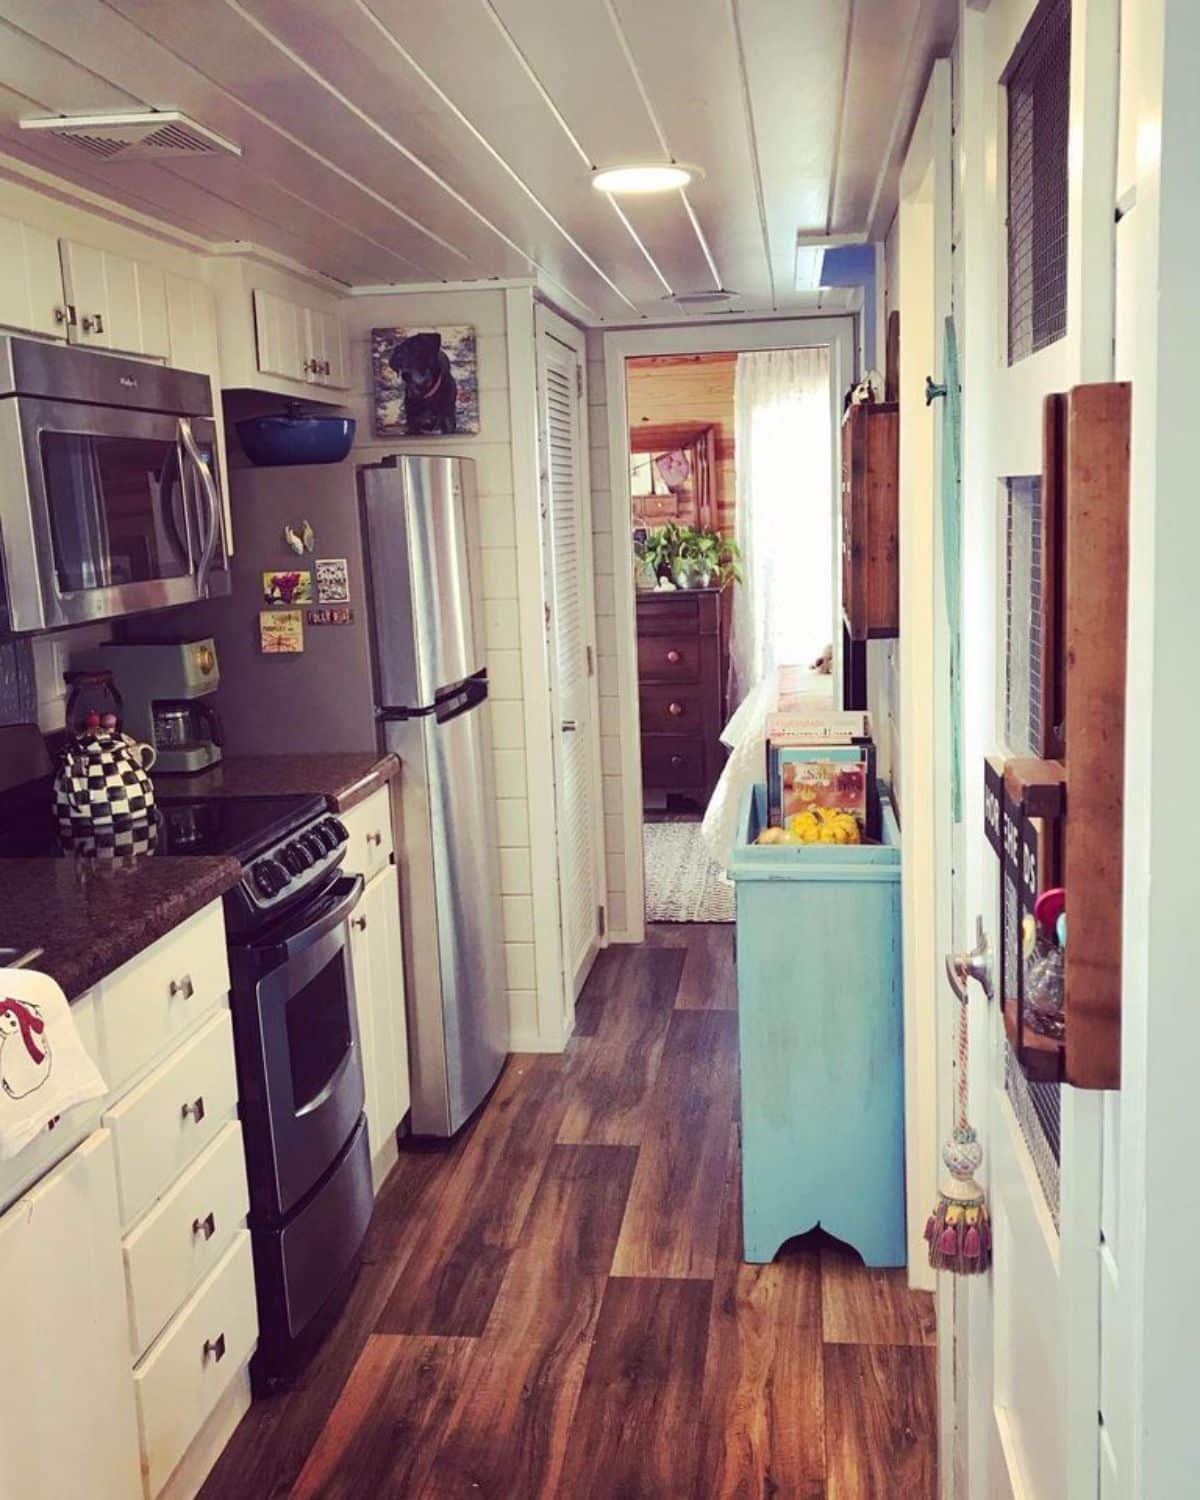 Kitchen area of tiny home in Simple Life Community